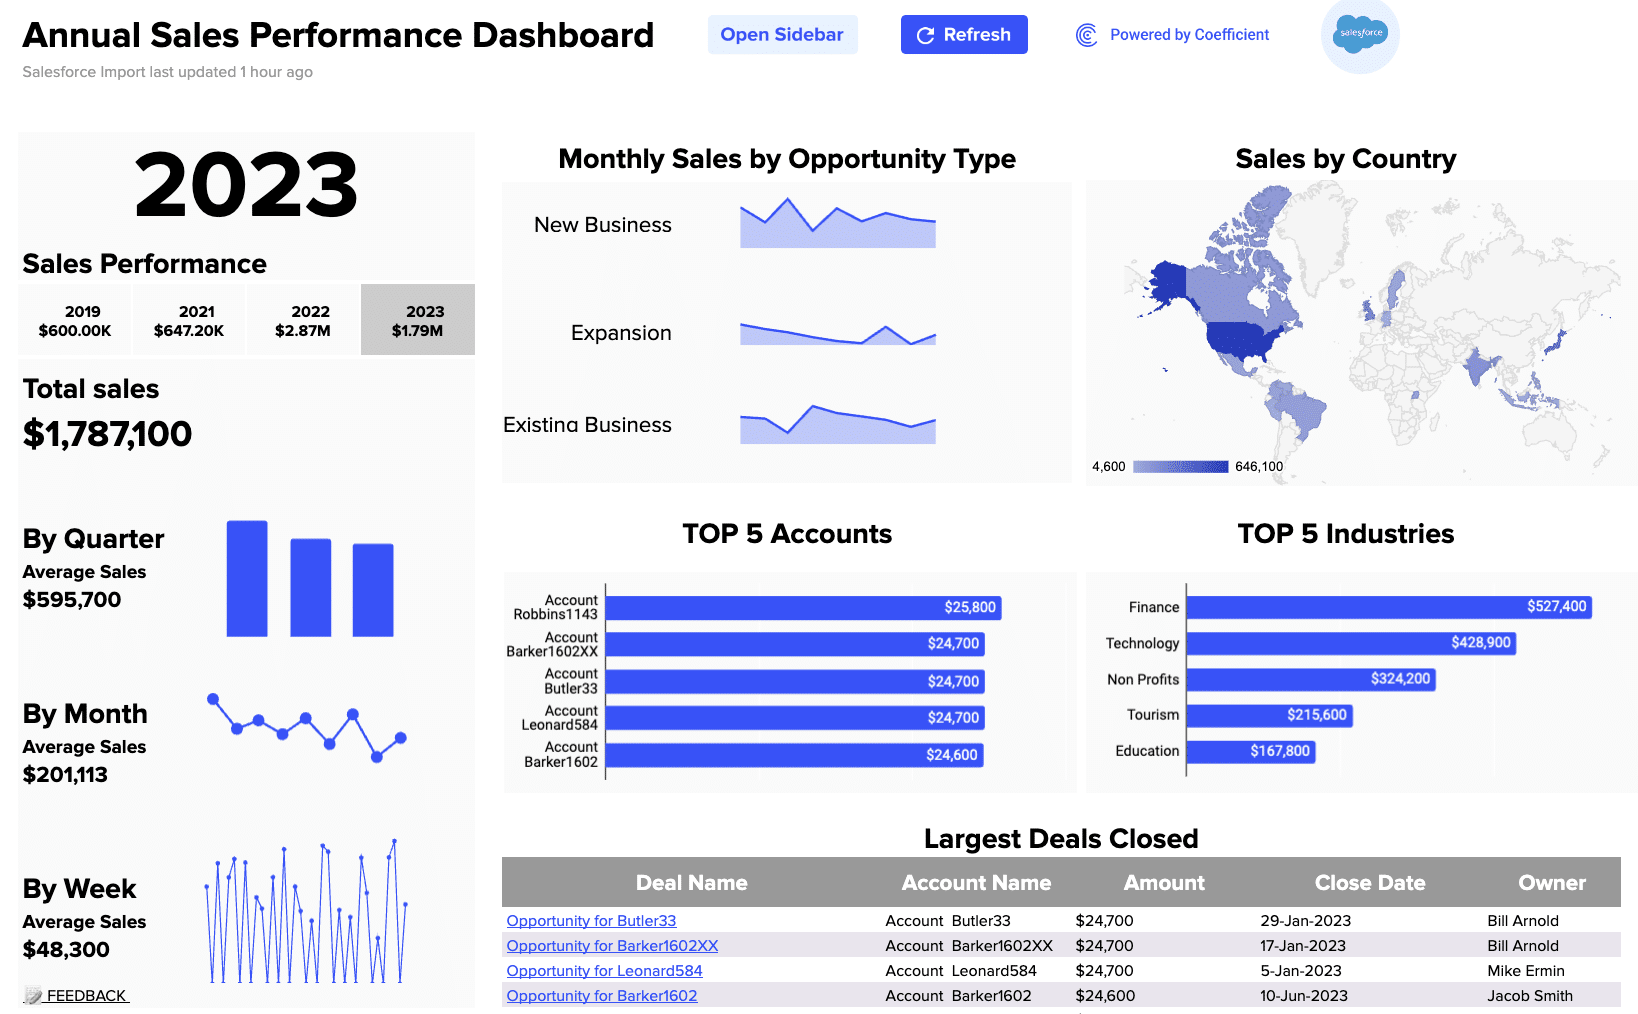 The sales perofmance dashboard provides real-time insights into both individual and team sales activities